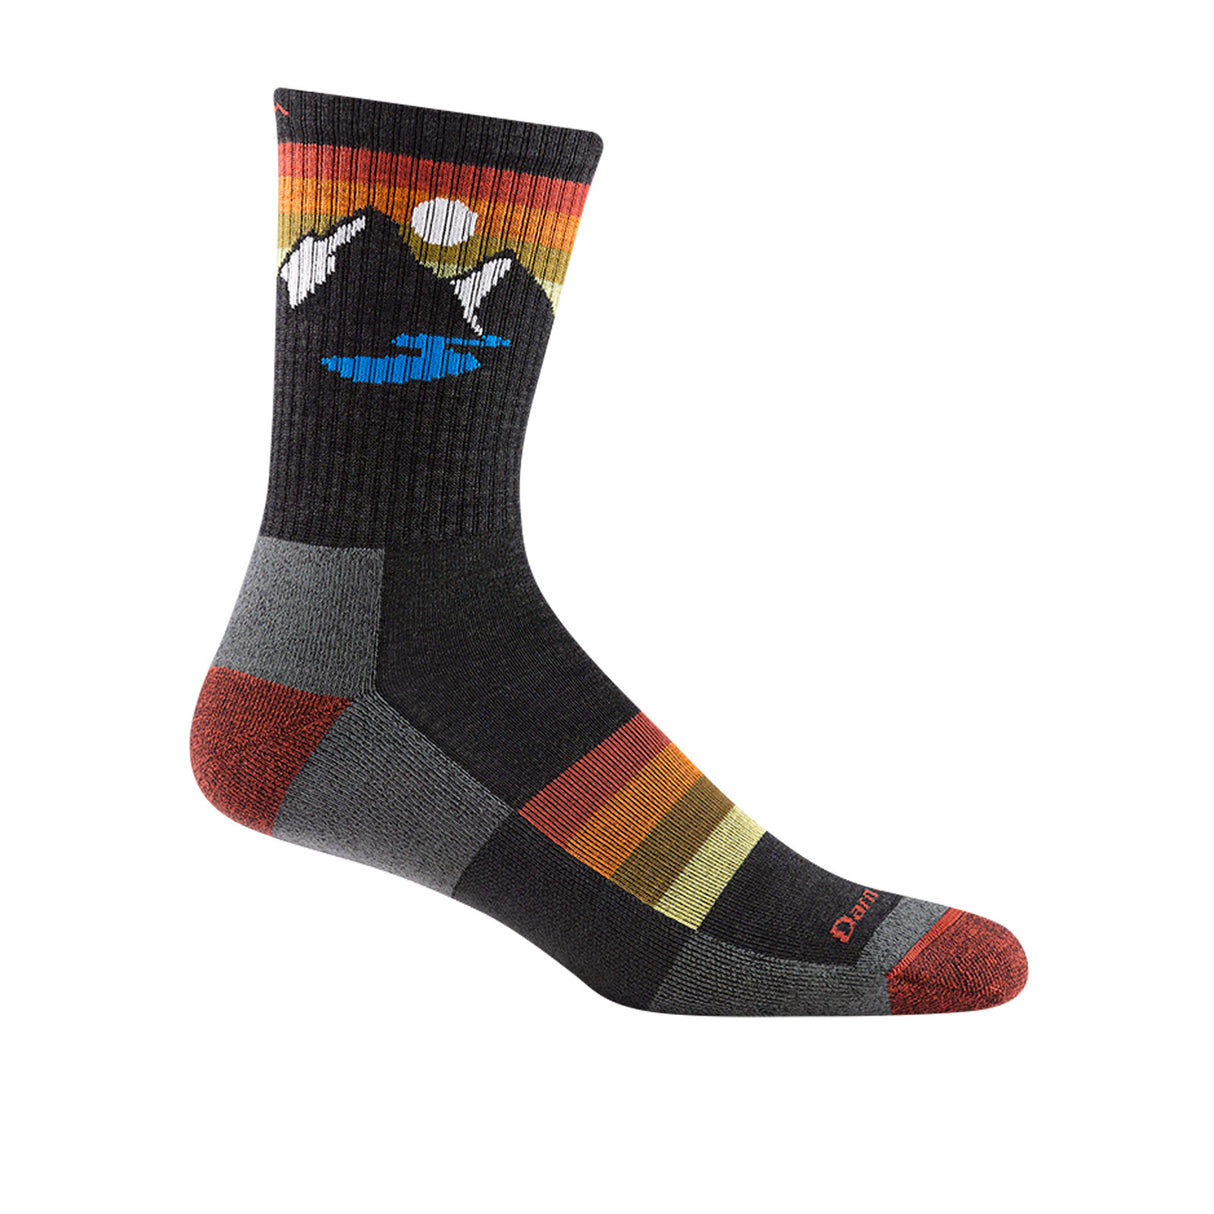 Darn Tough Sunset Ridge Lightweight Micro Crew Sock with Cushion (Men) - Charcoal Accessories - Socks - Lifestyle - The Heel Shoe Fitters